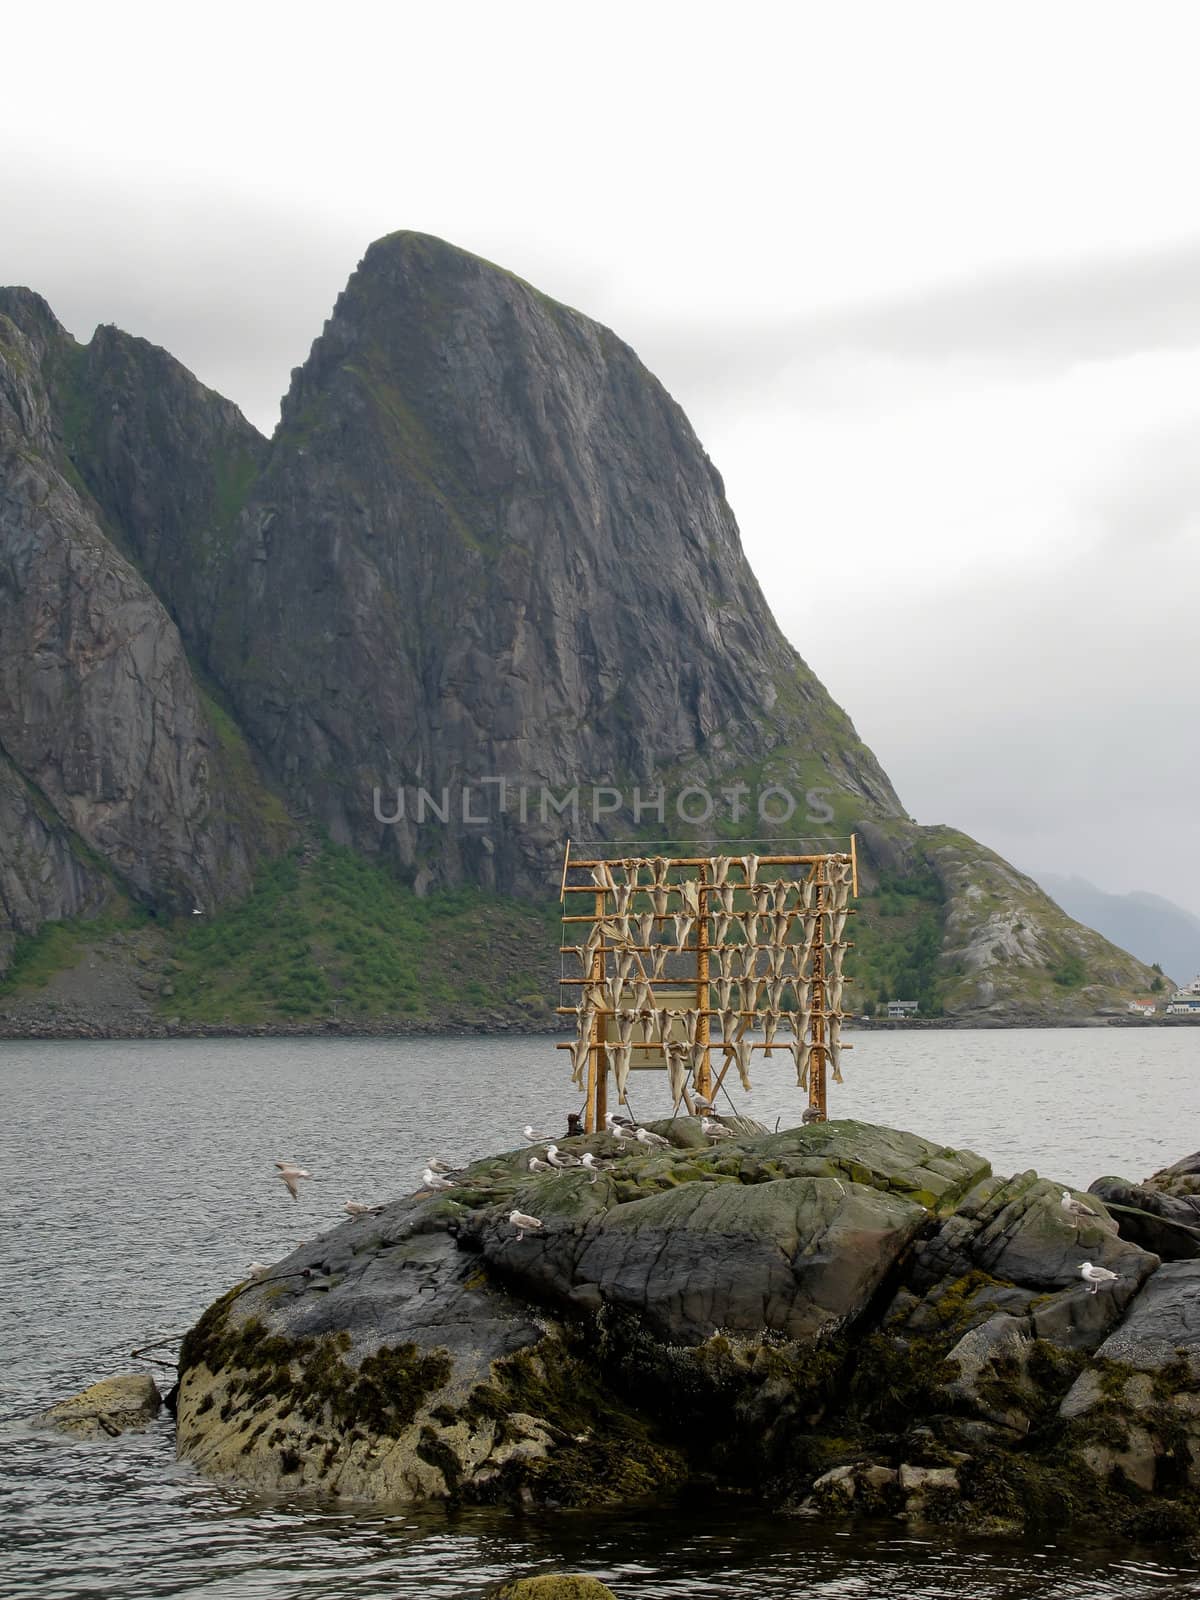 Landscape at Norway islands with dried fishes
